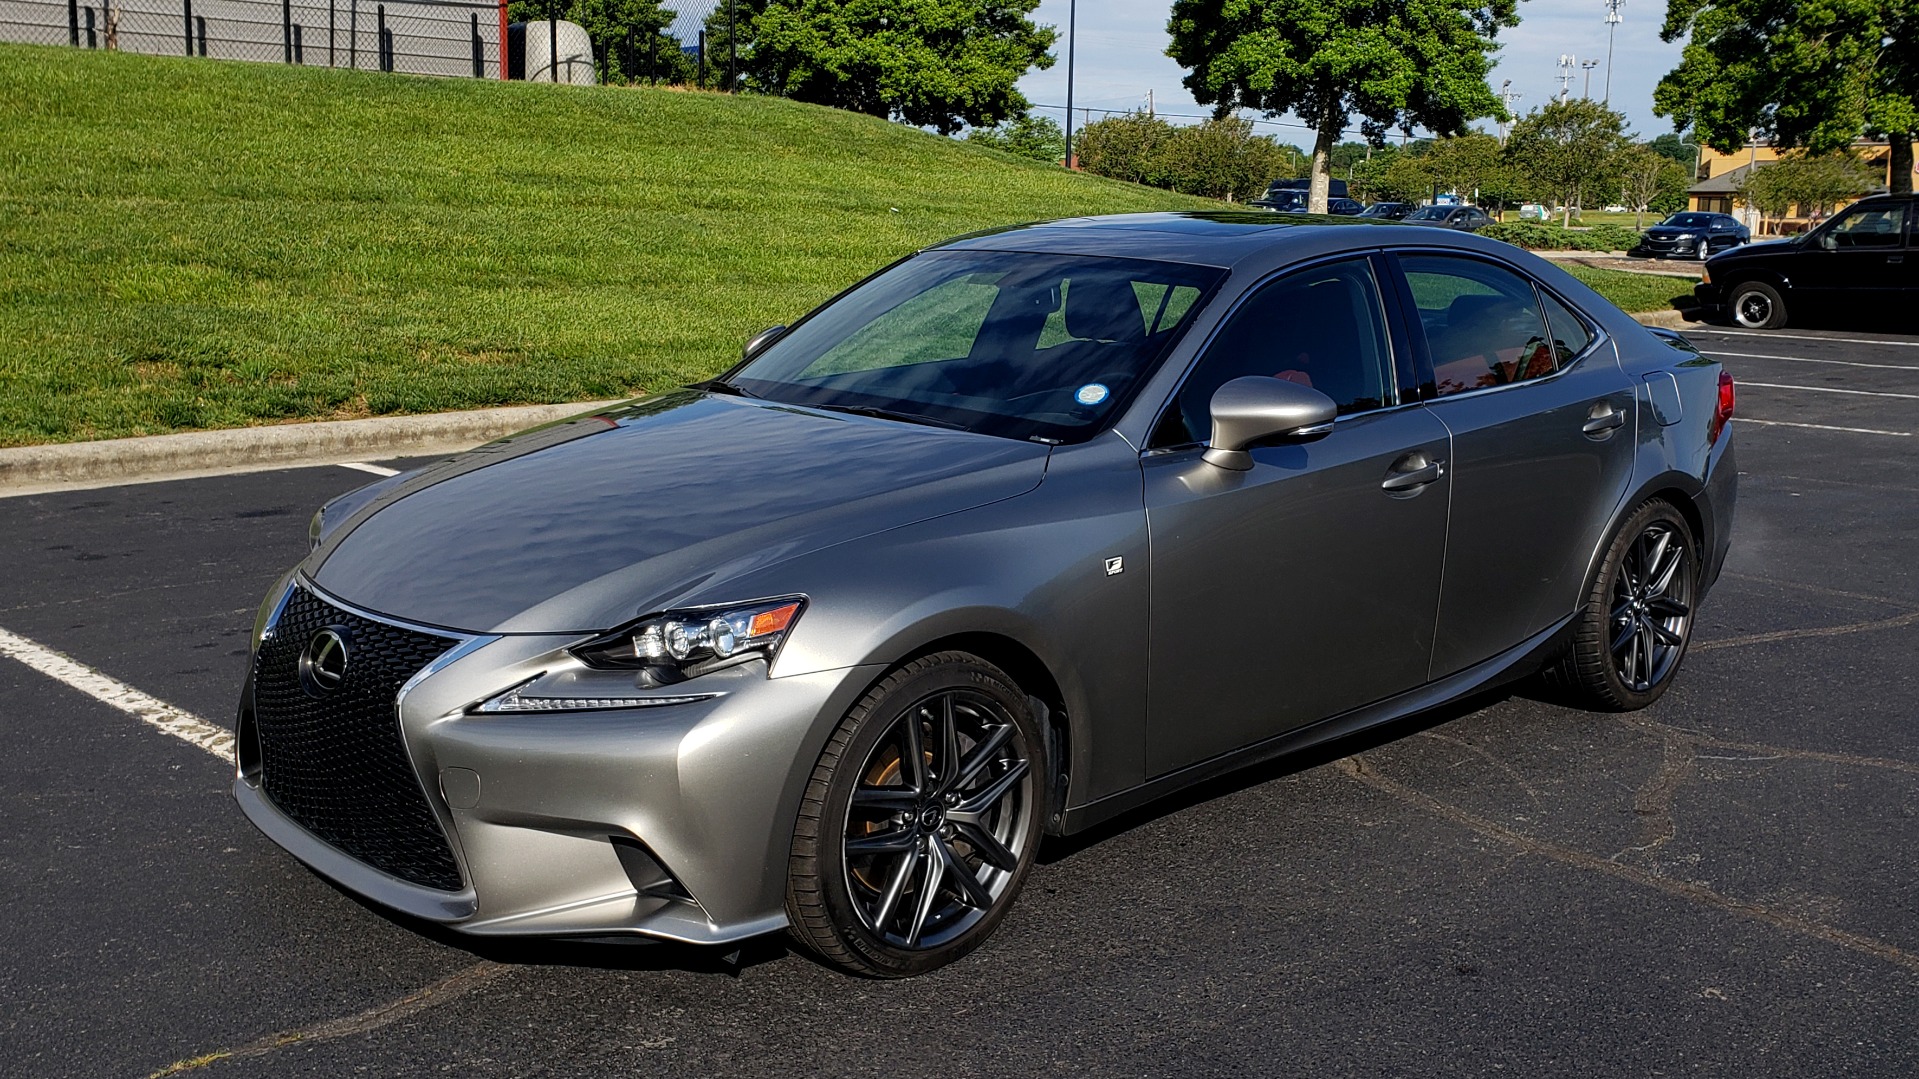 Used 2016 Lexus IS 300 F-SPORT / SUNROOF / BSM / VENTILATED SEATS /  REARVIEW For Sale ($18,995) | Formula Imports Stock #F10490A